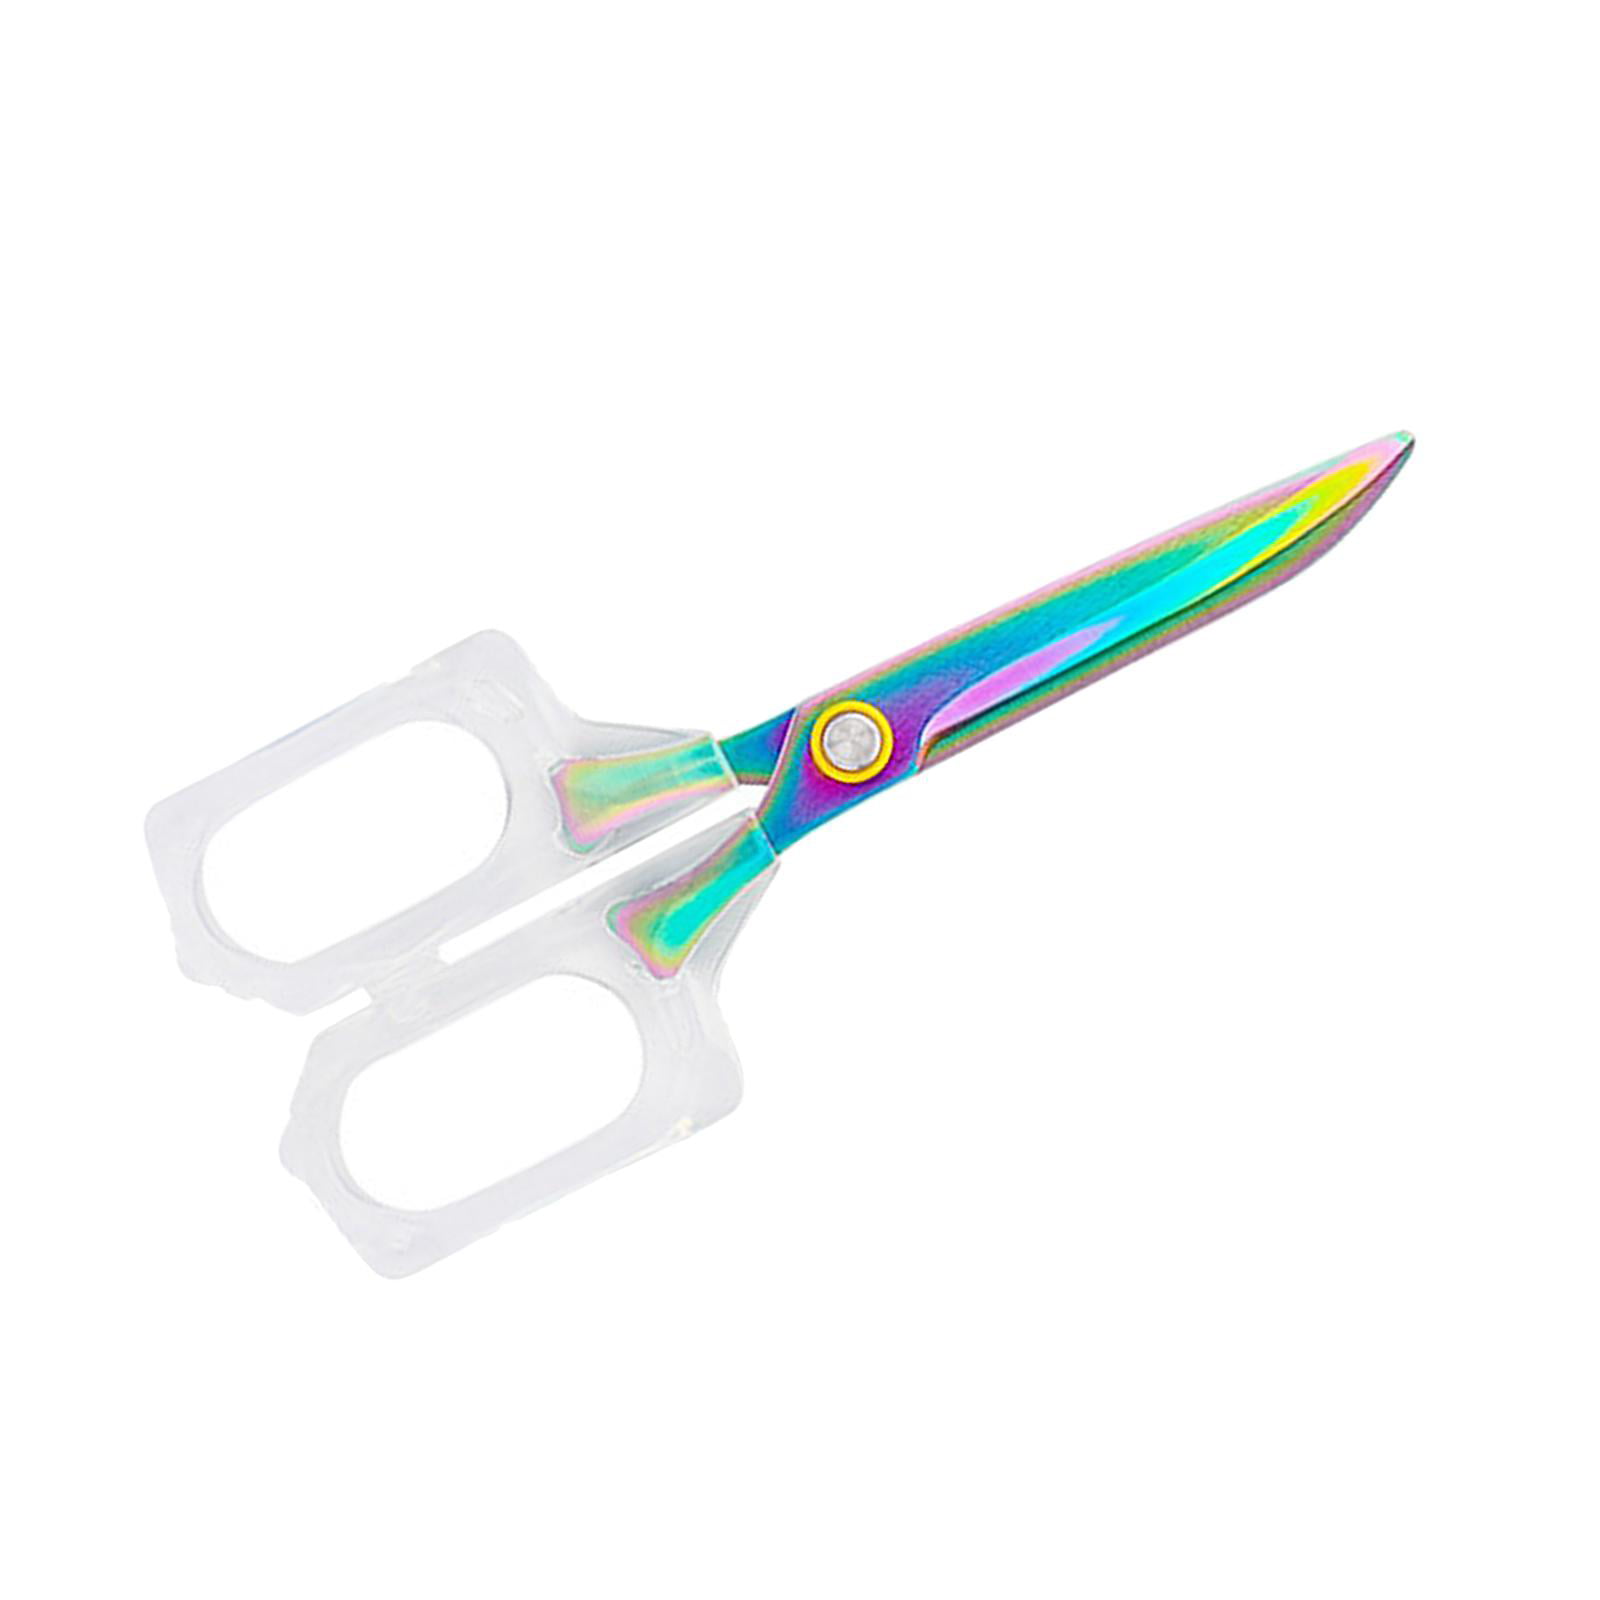 5″ Blunt Lefty Scissors  Craft and Classroom Supplies by Hygloss